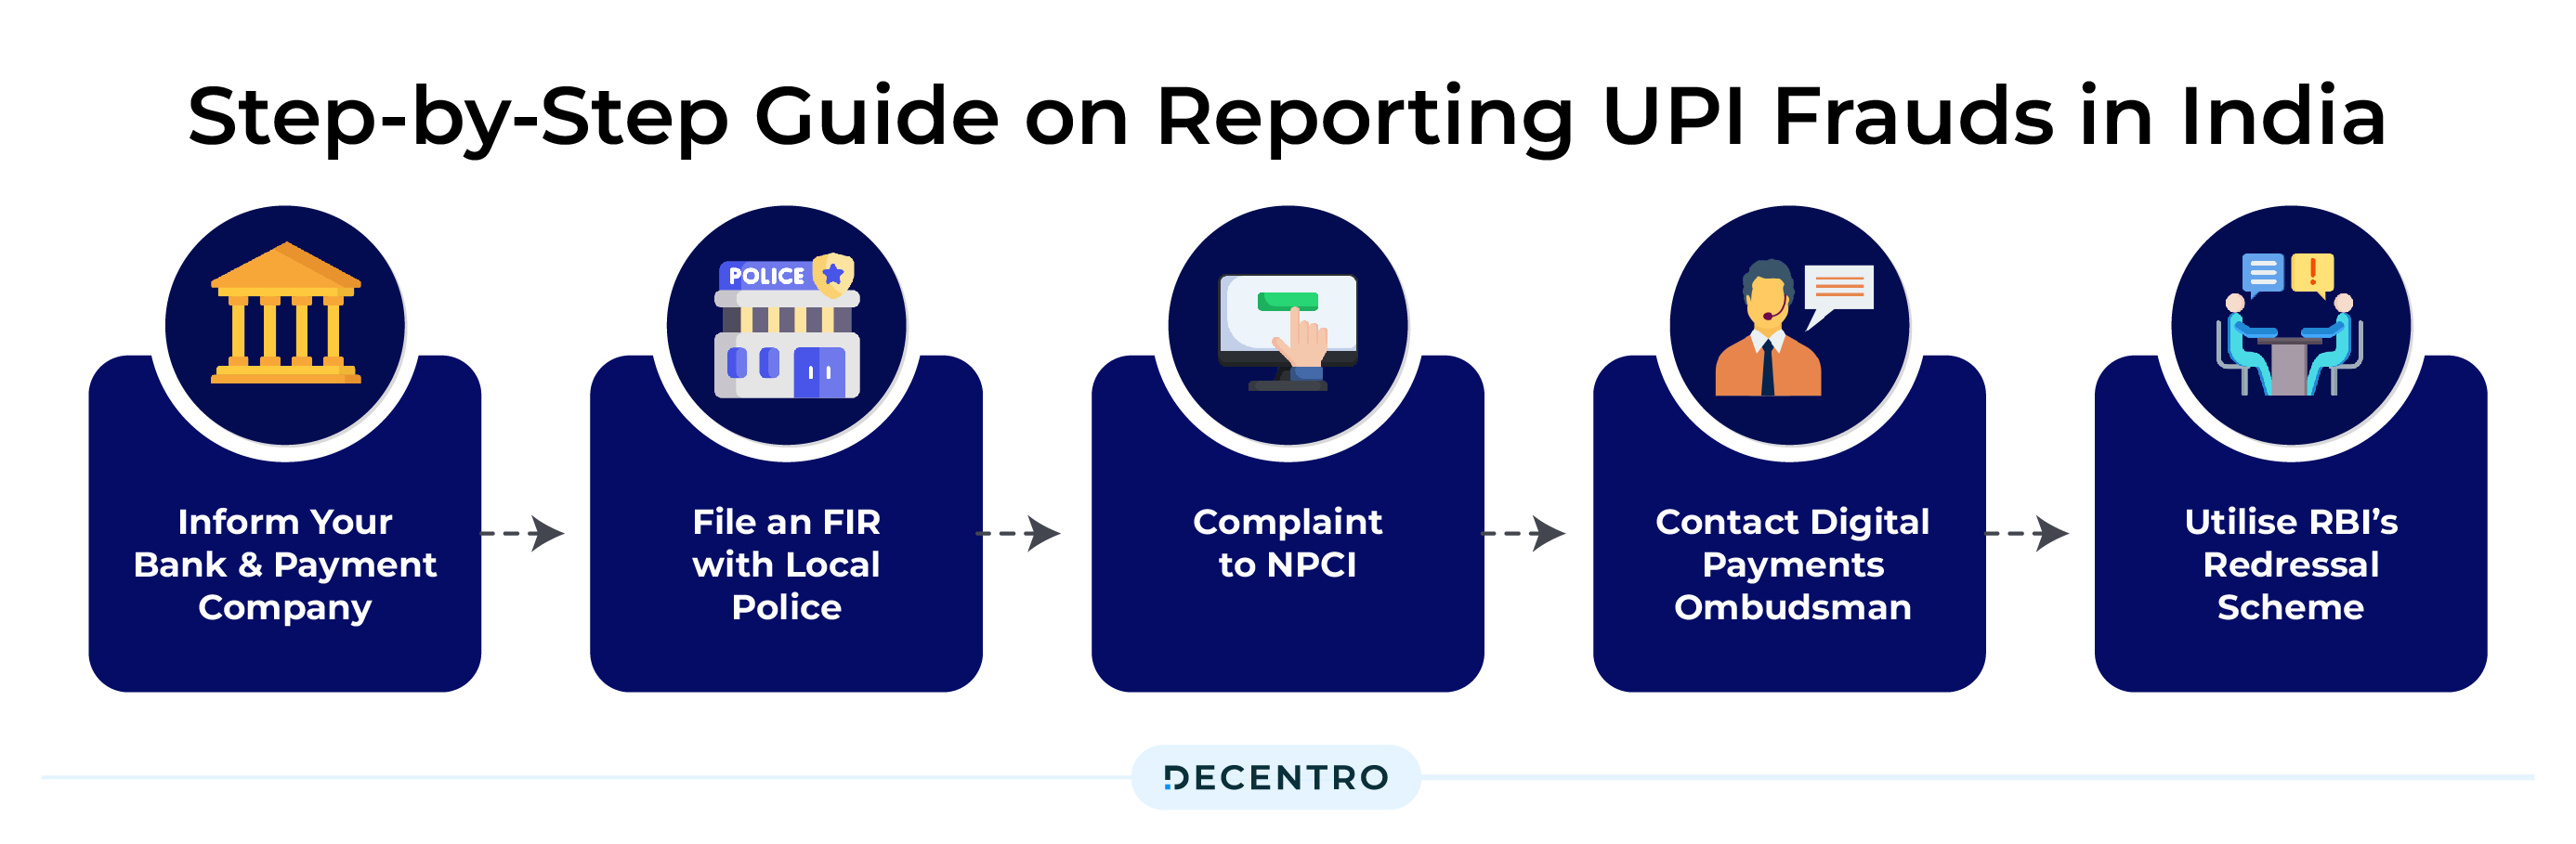 Step-by-Step guide on reporting UPI Frauds in India